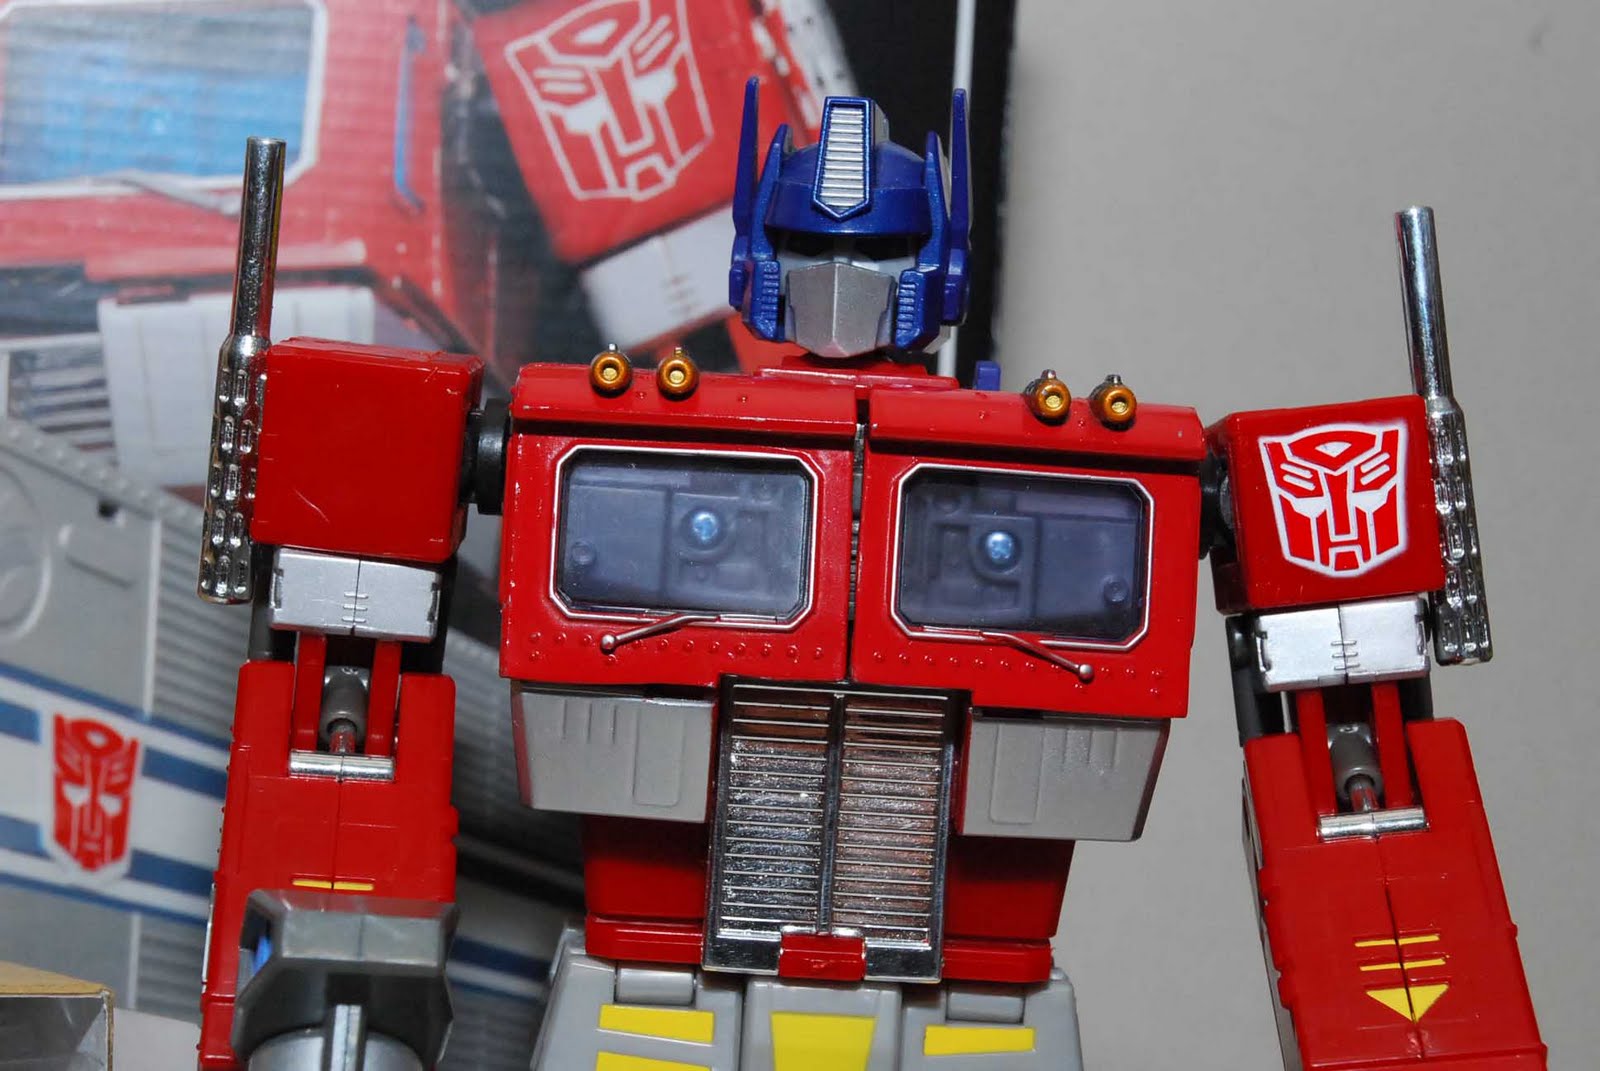 Used Transformer Toys 57